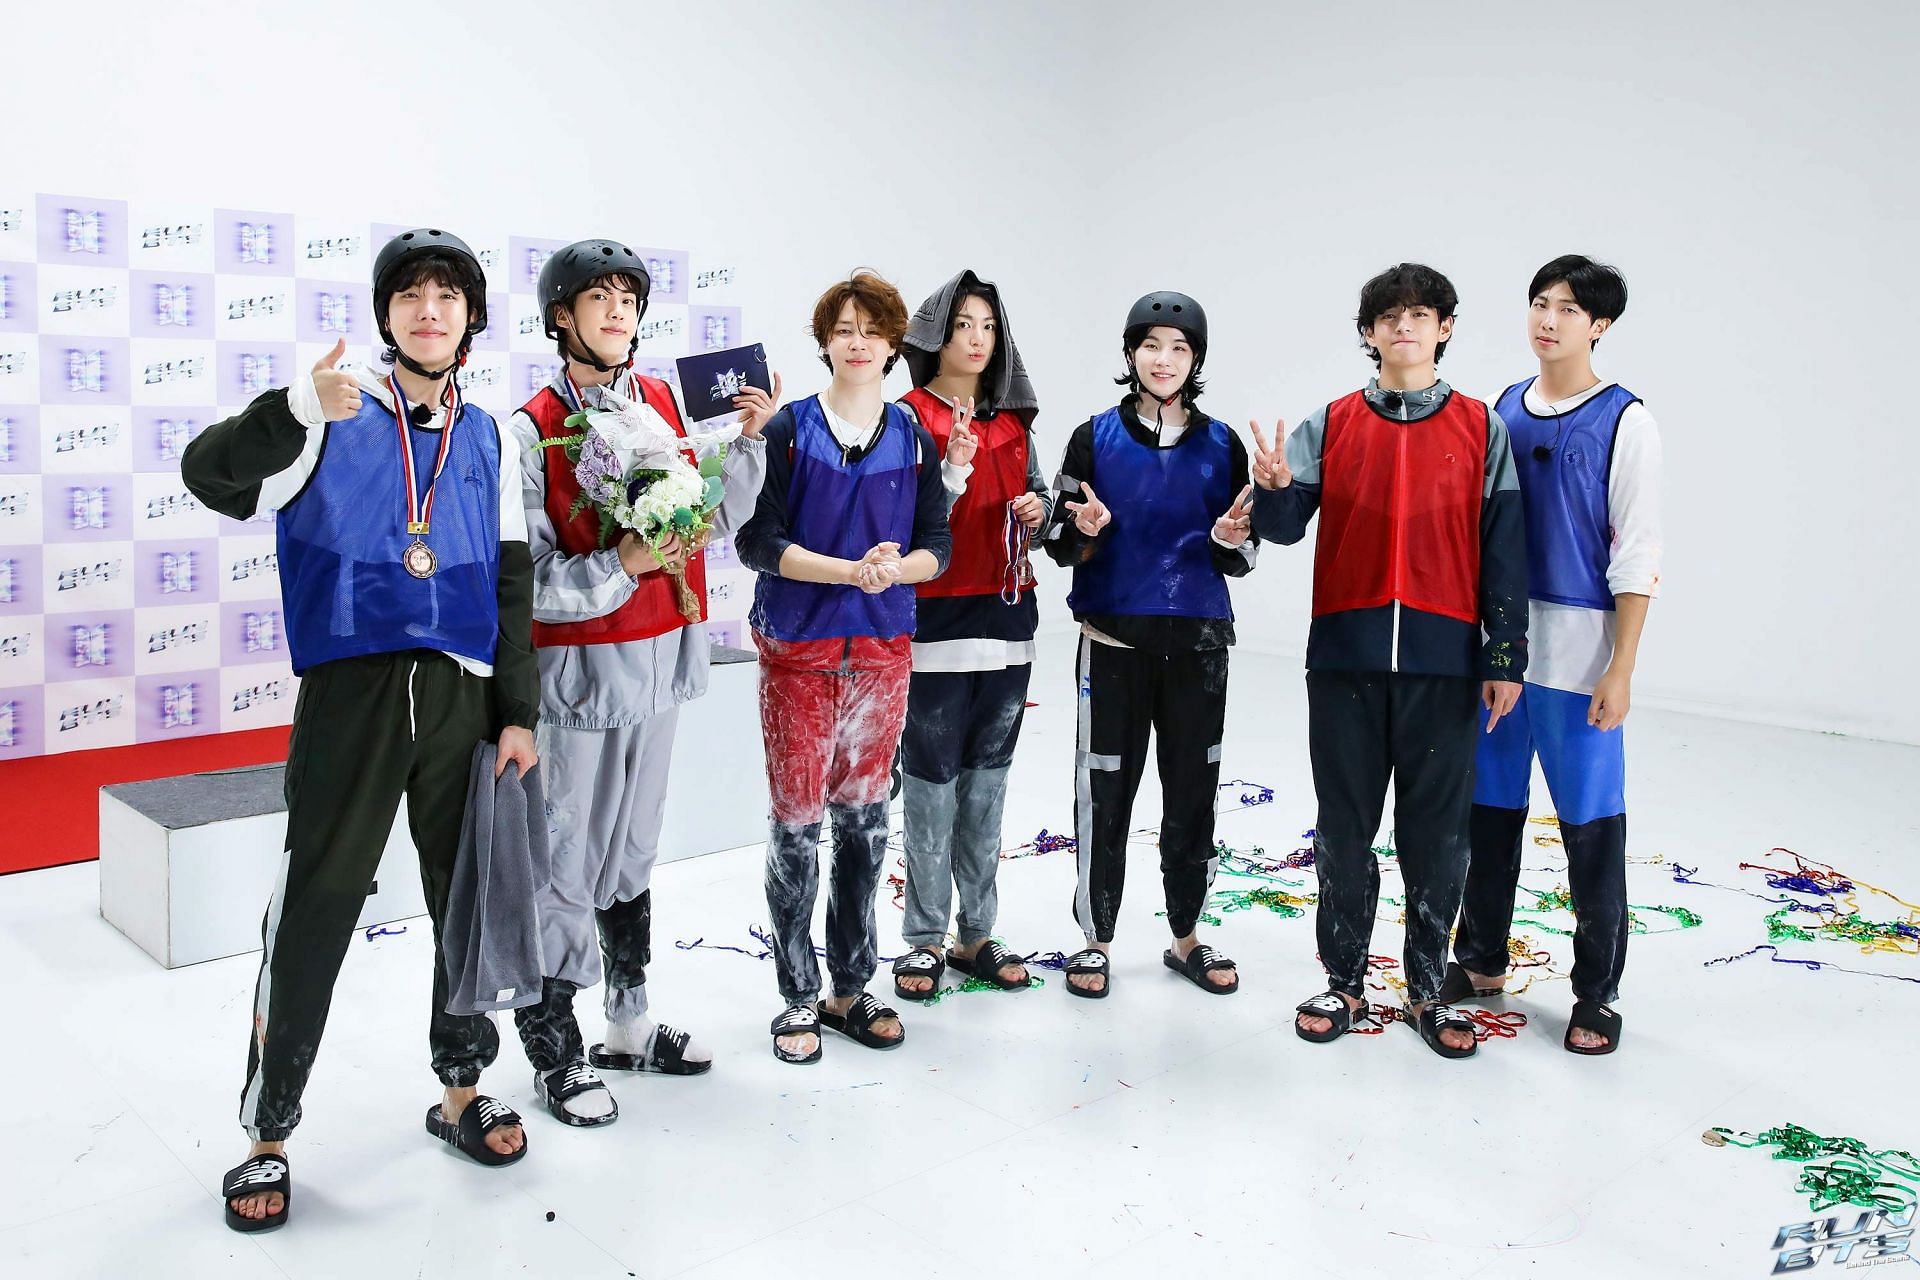 BTS pose during the filming of the mini Field day episode 2 against a white background, wearing sports outfits.